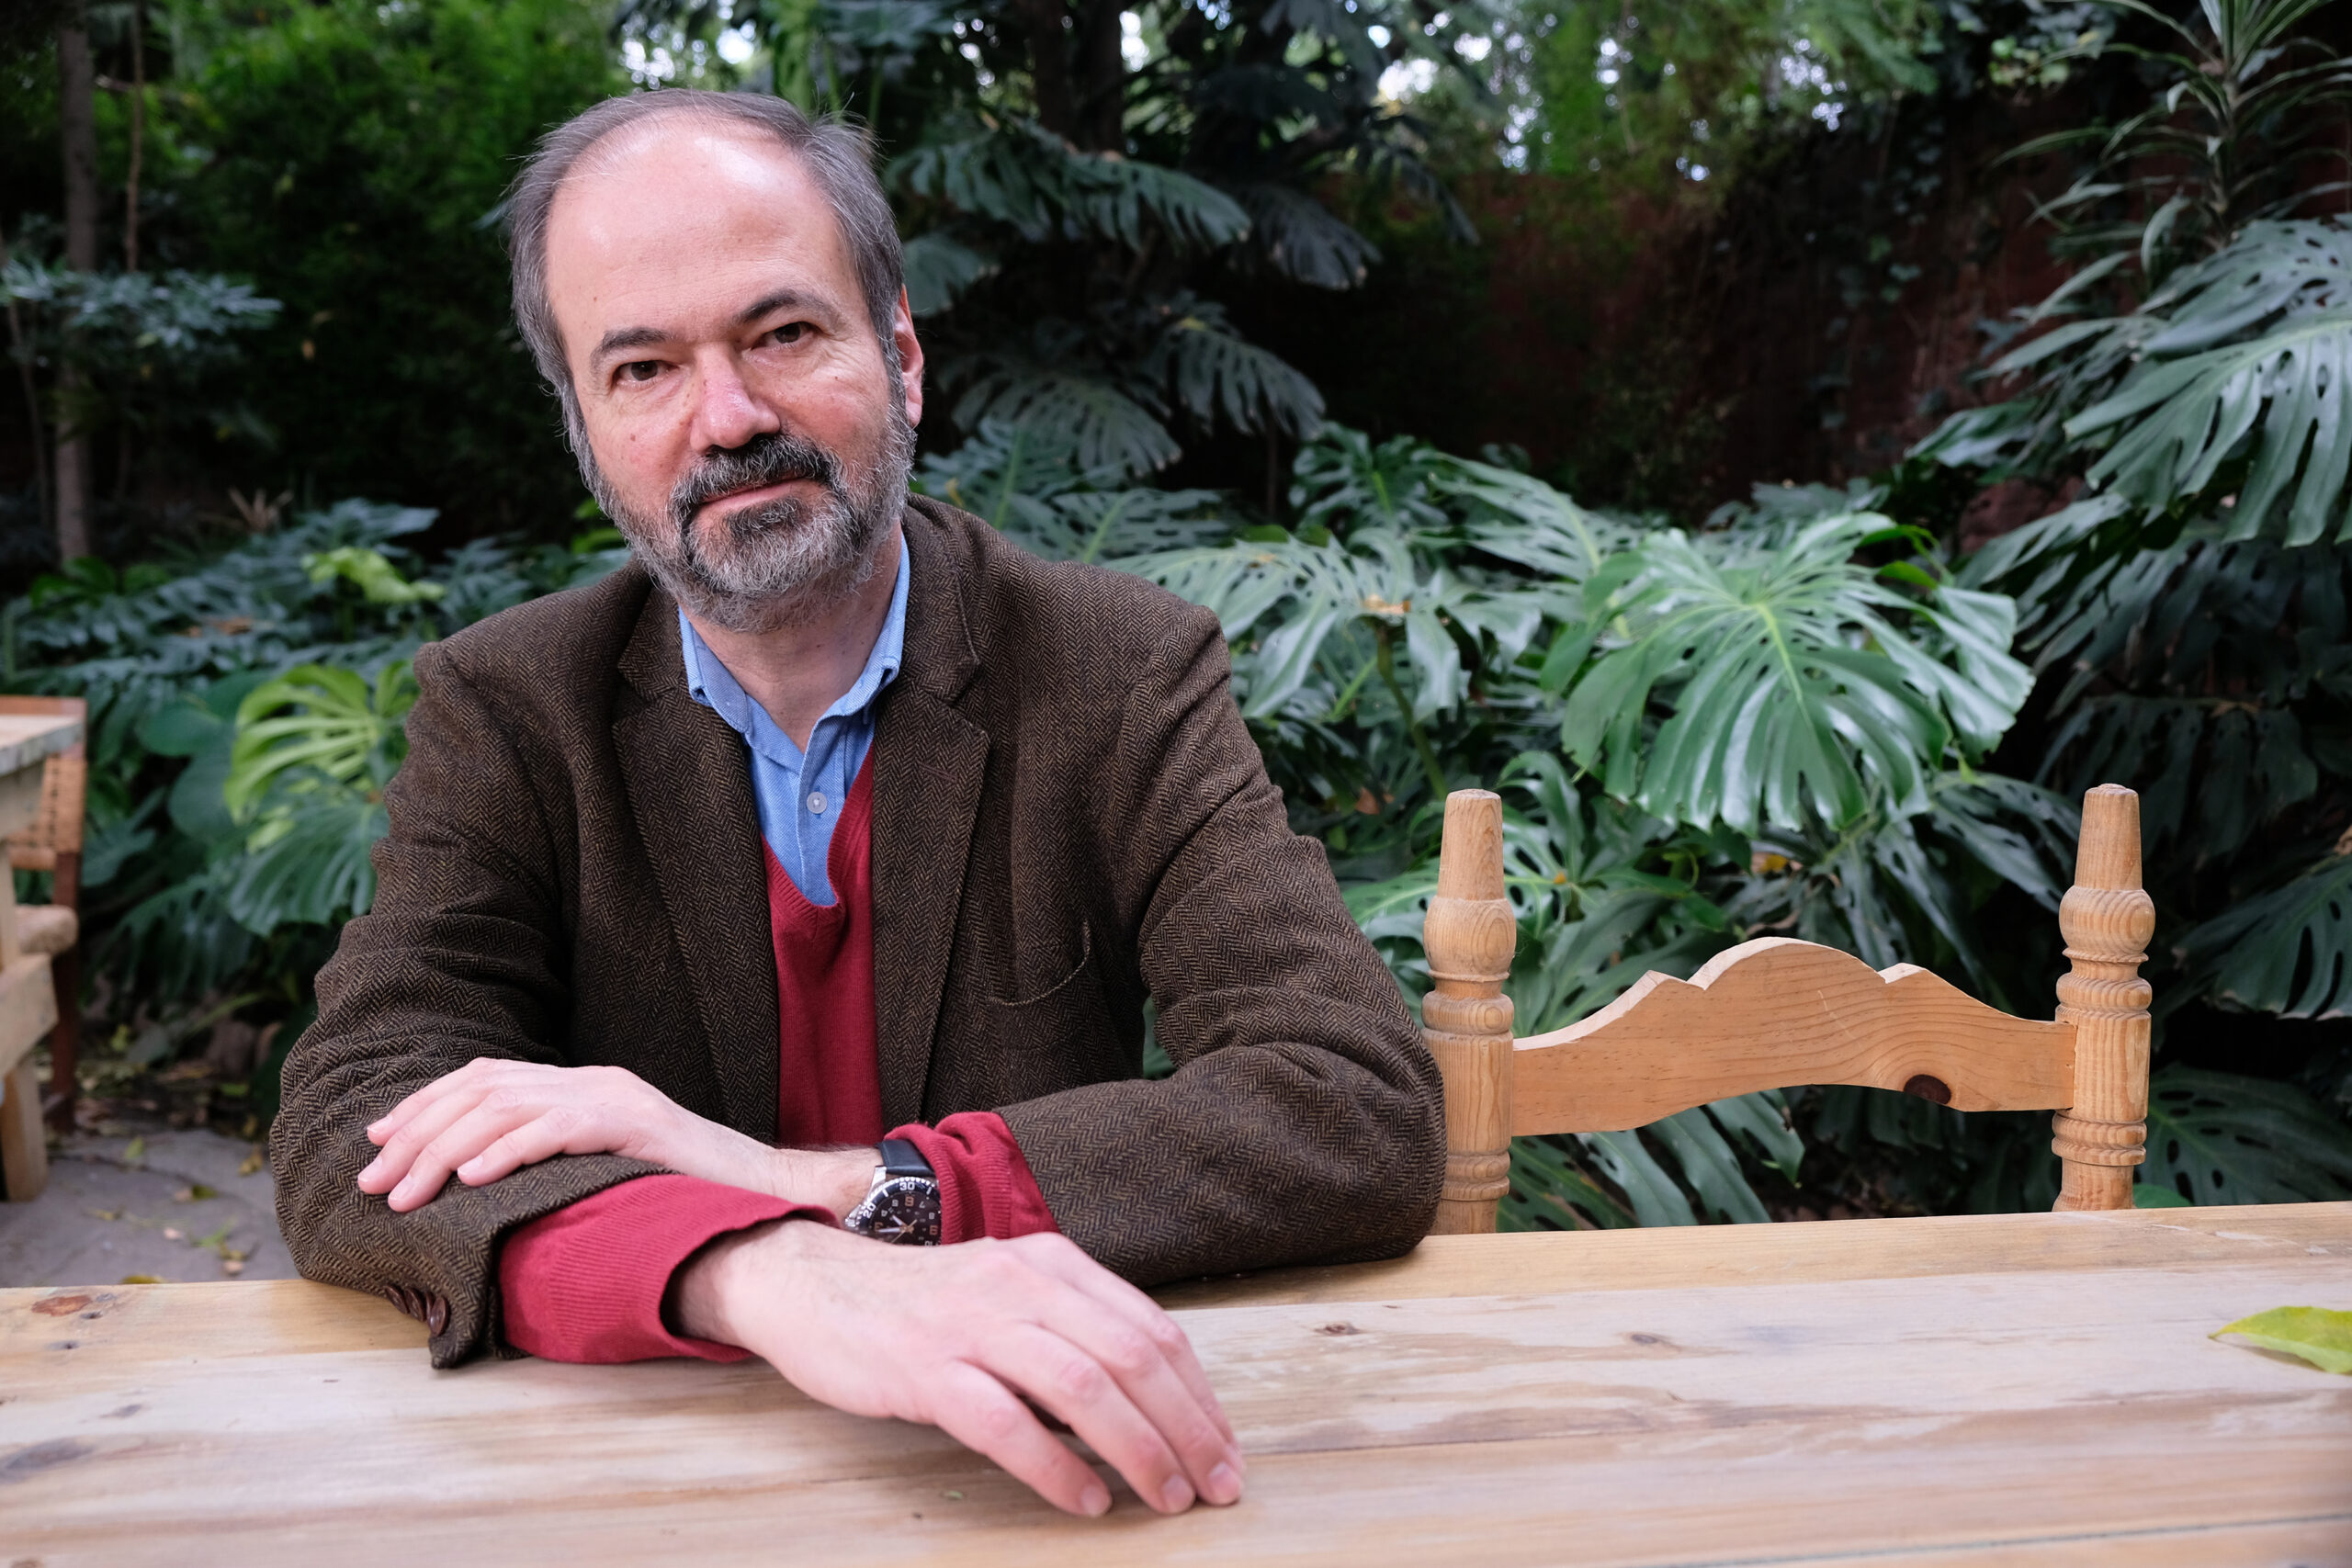 Man with goatee sitting at a wooden table with some plants in the background